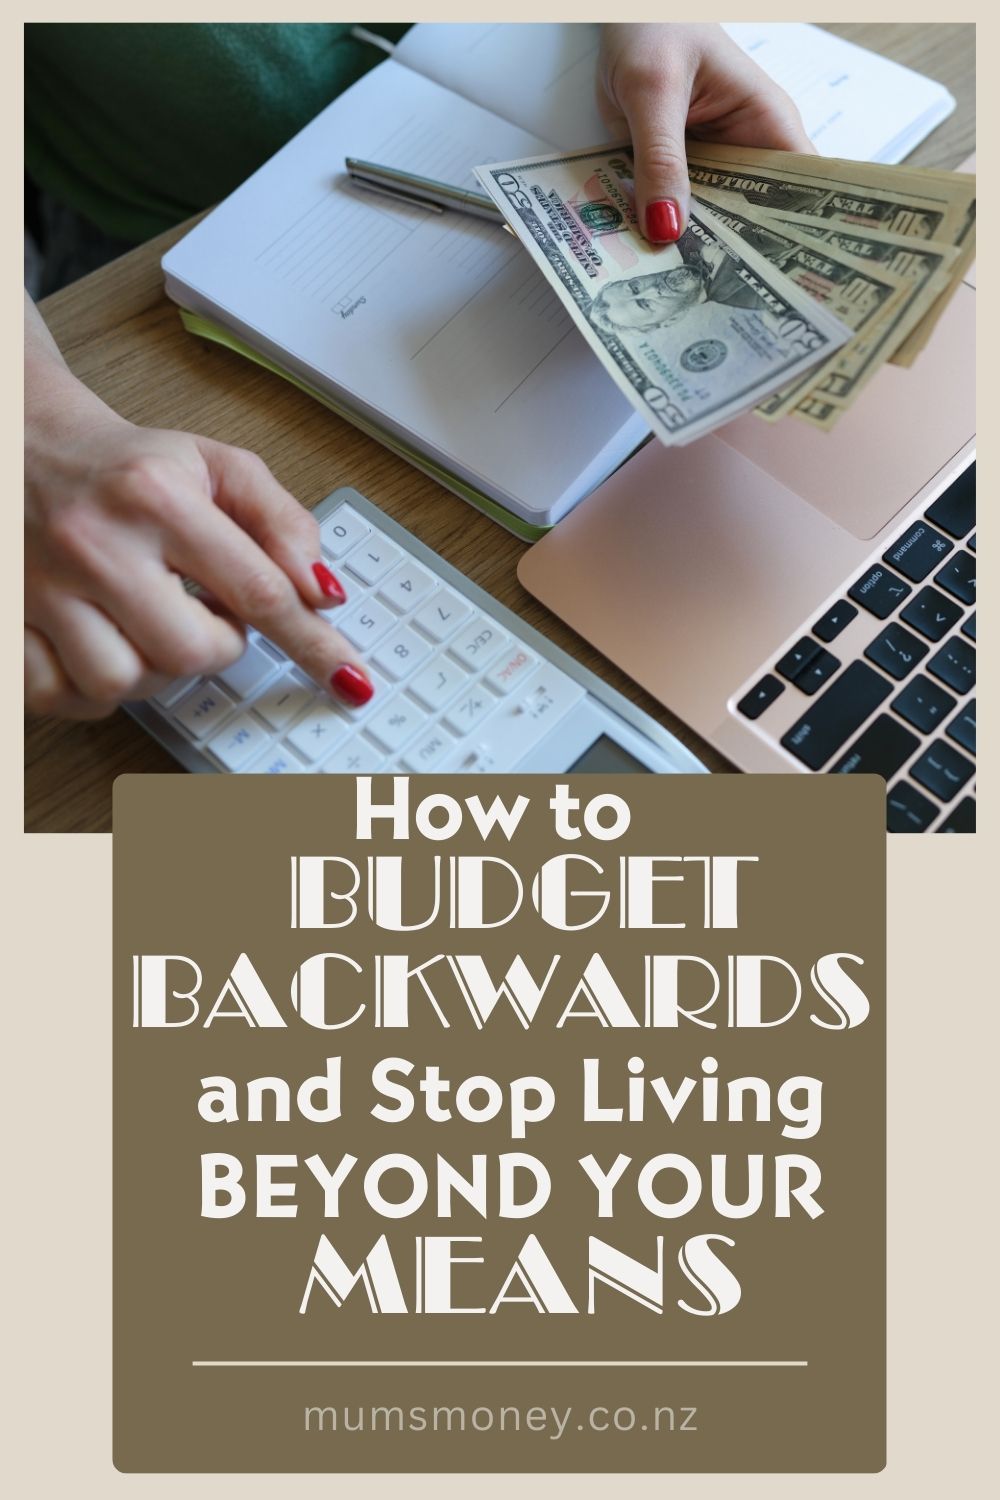 How to Budget Backwards and Stop Living Beyond Your Means